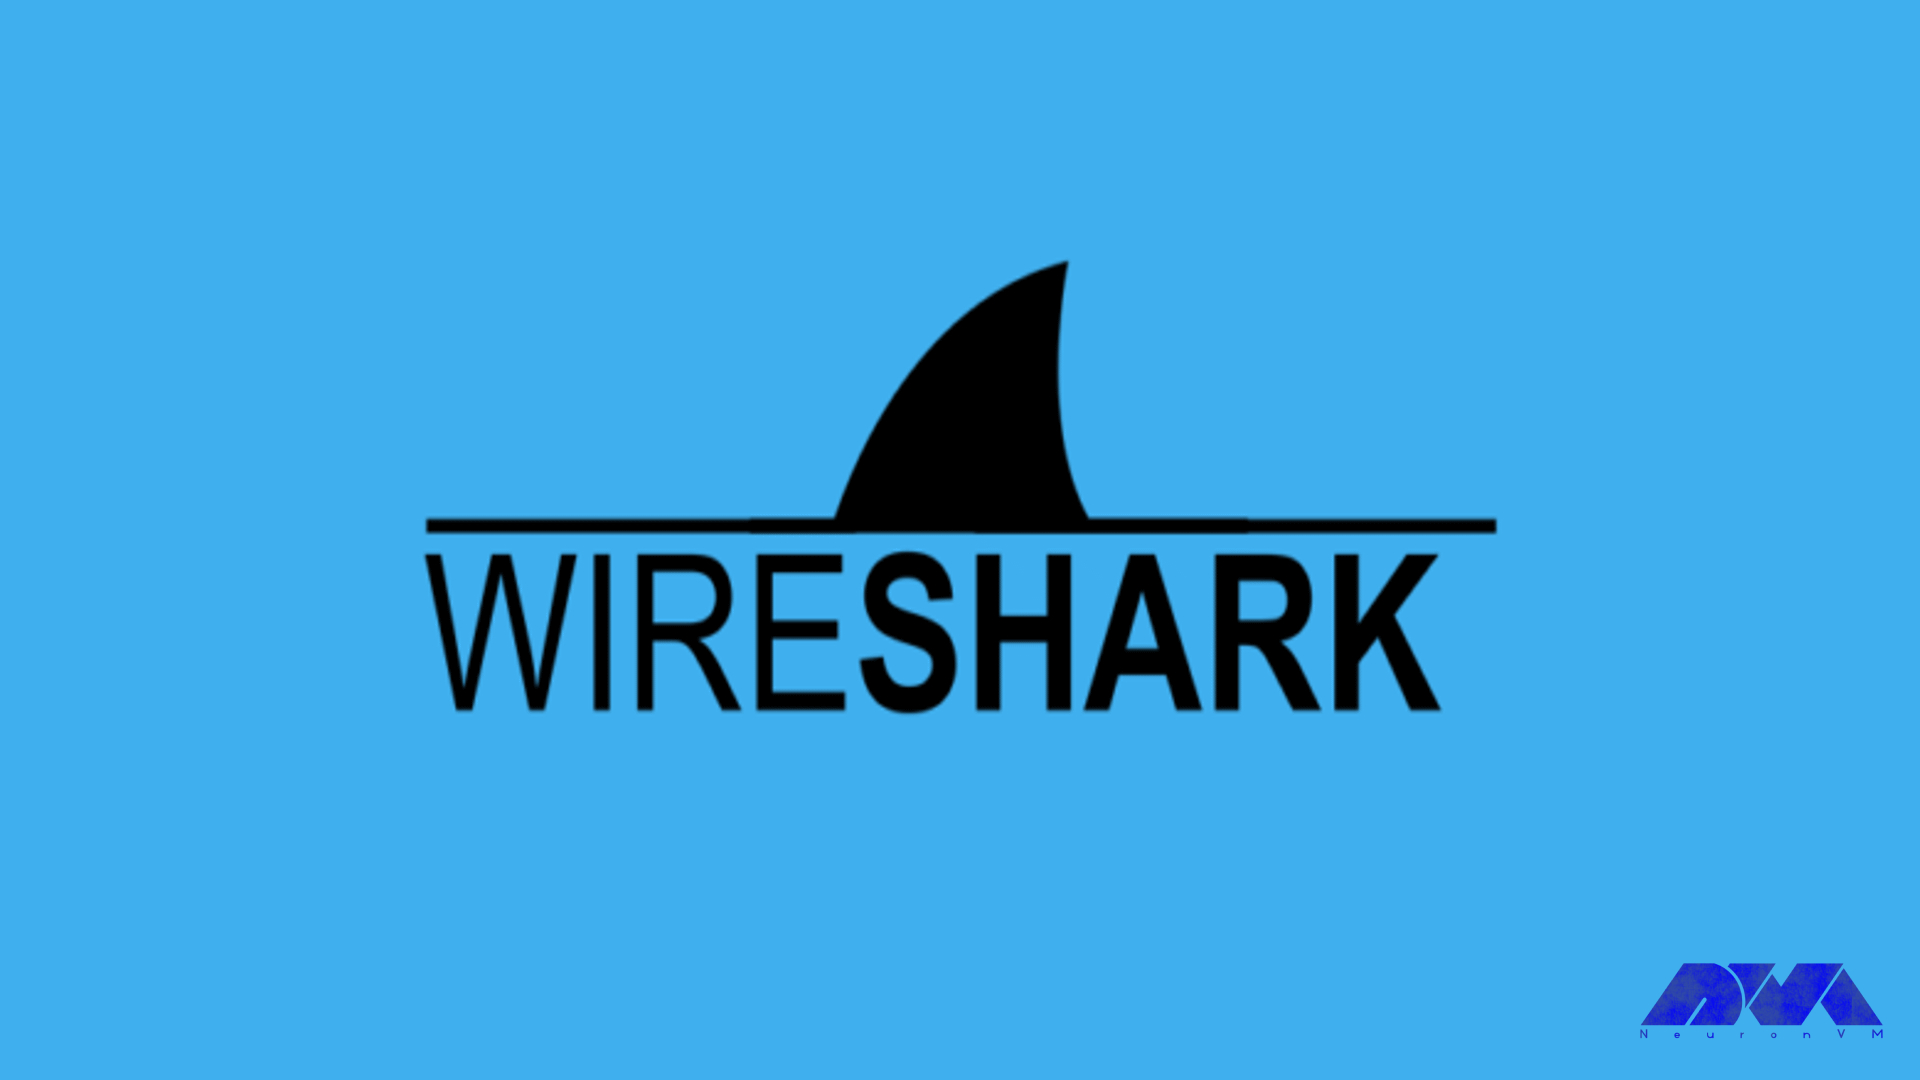 What is Wireshark and how does it work?